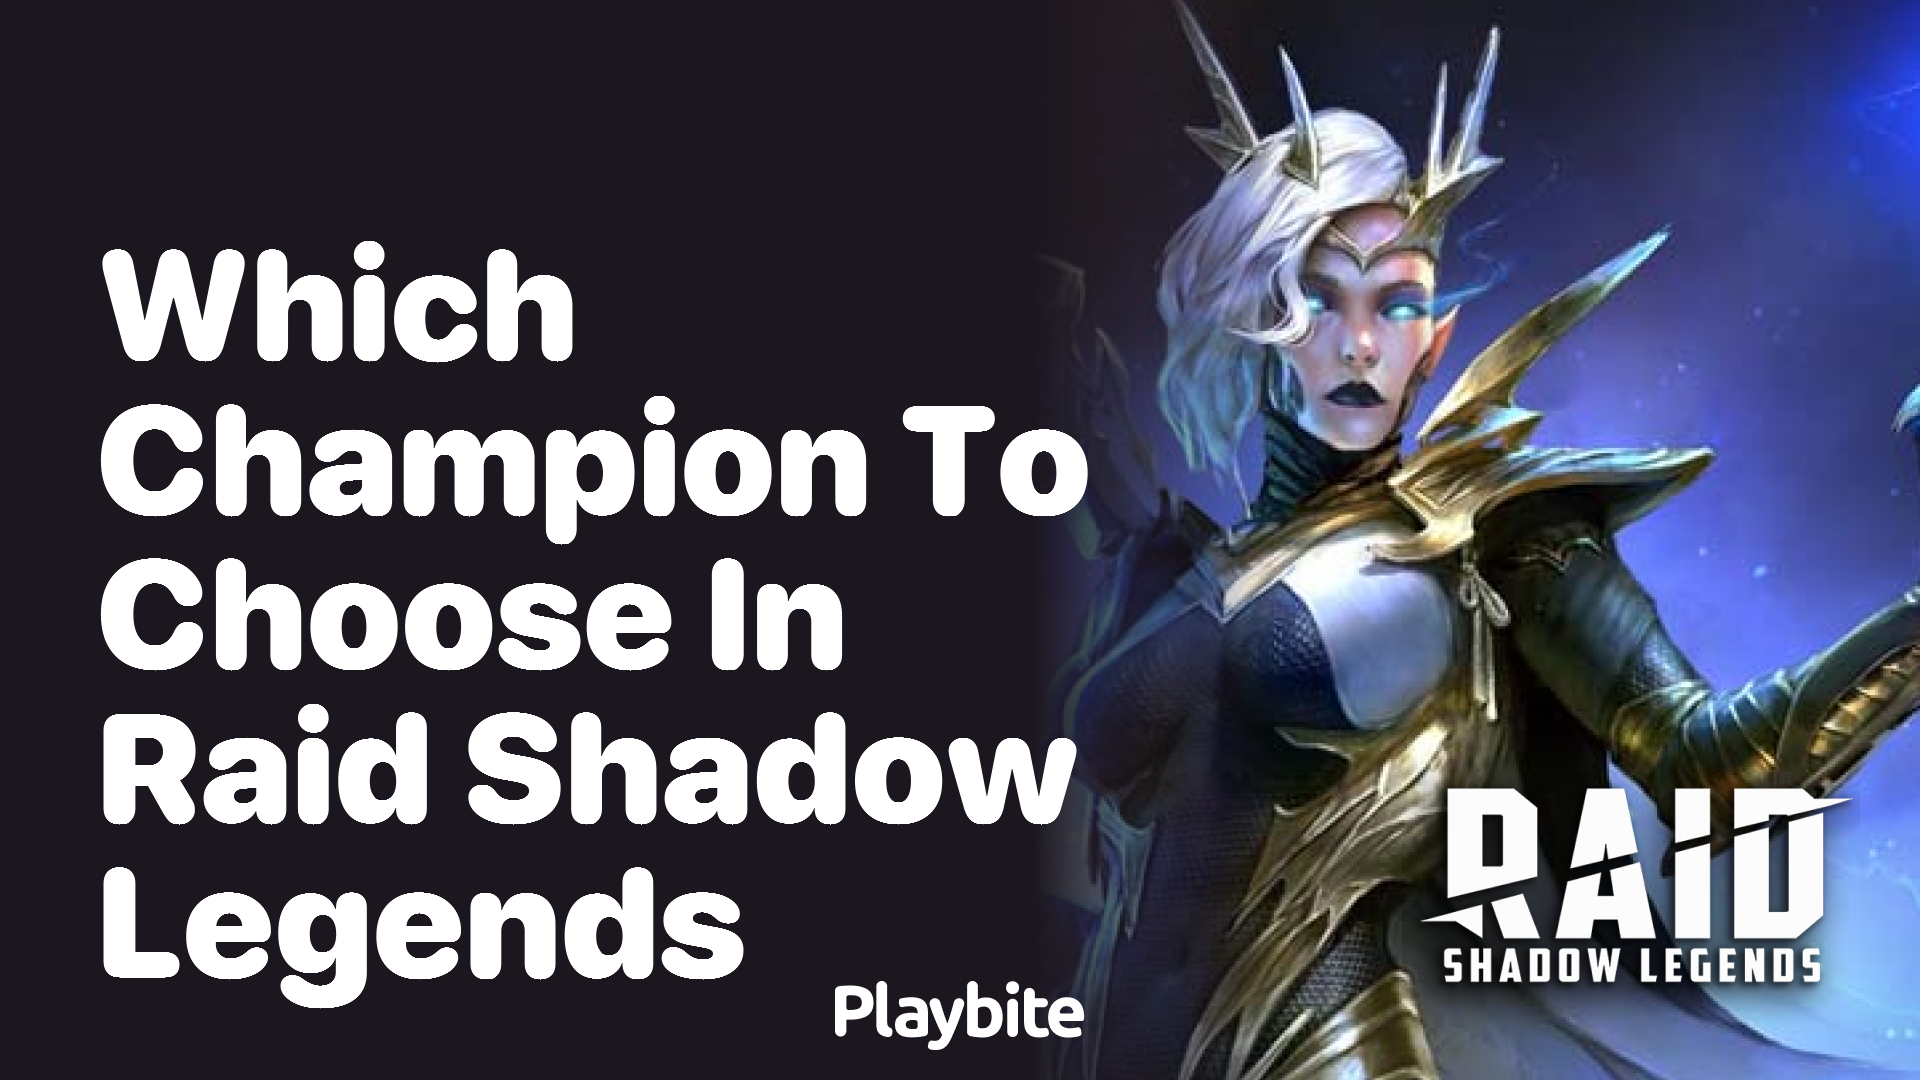 Which Champion to Choose in Raid Shadow Legends?